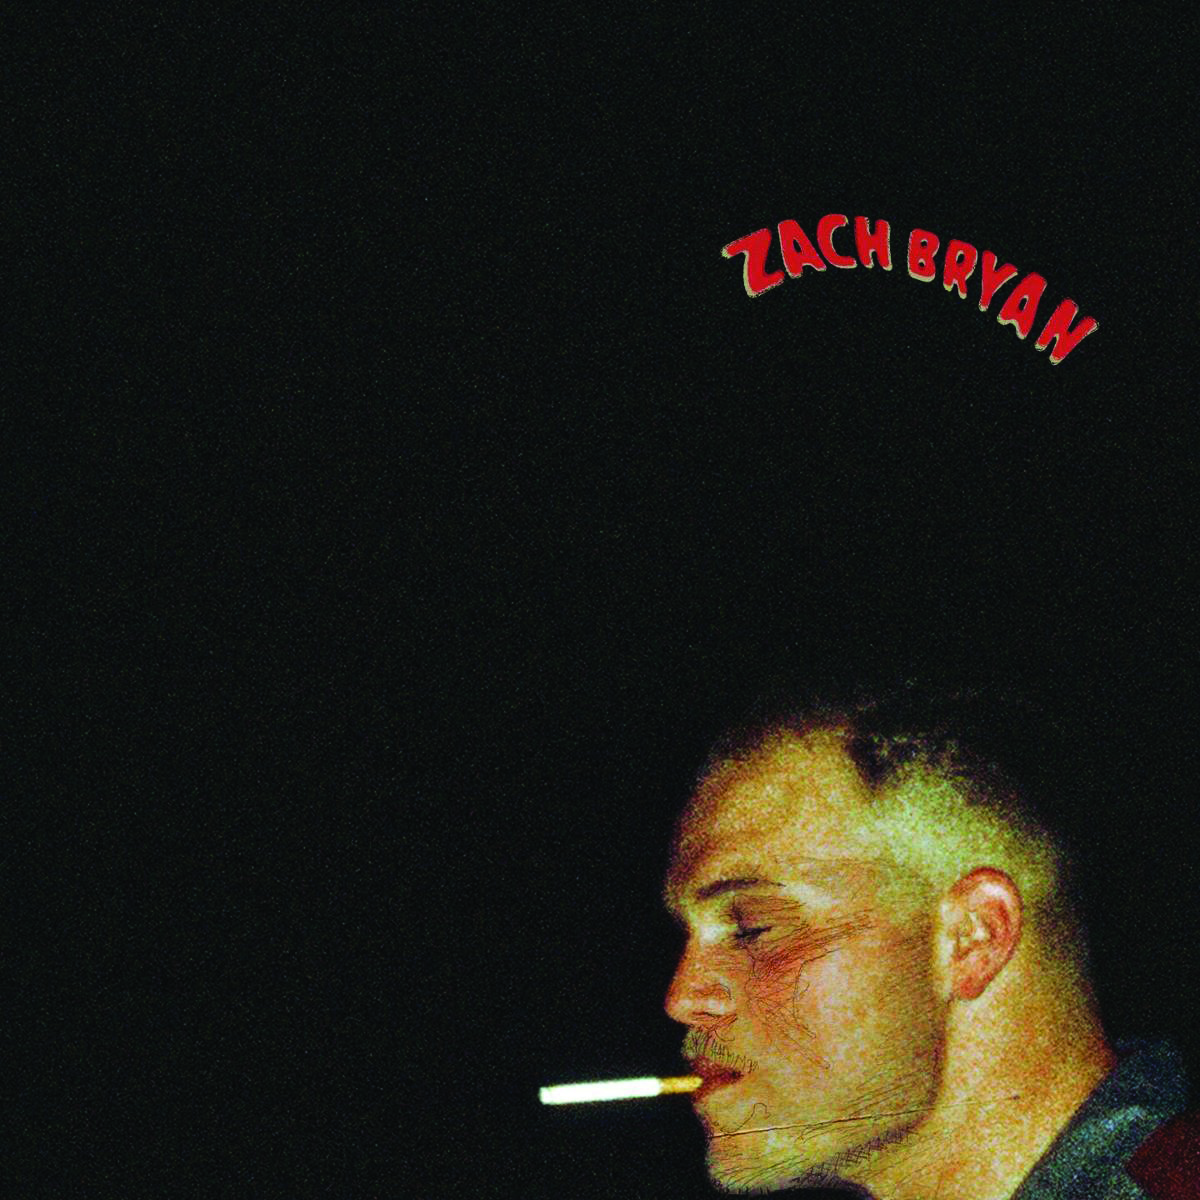 Zach Bryans Self Titled: A truly authentic project